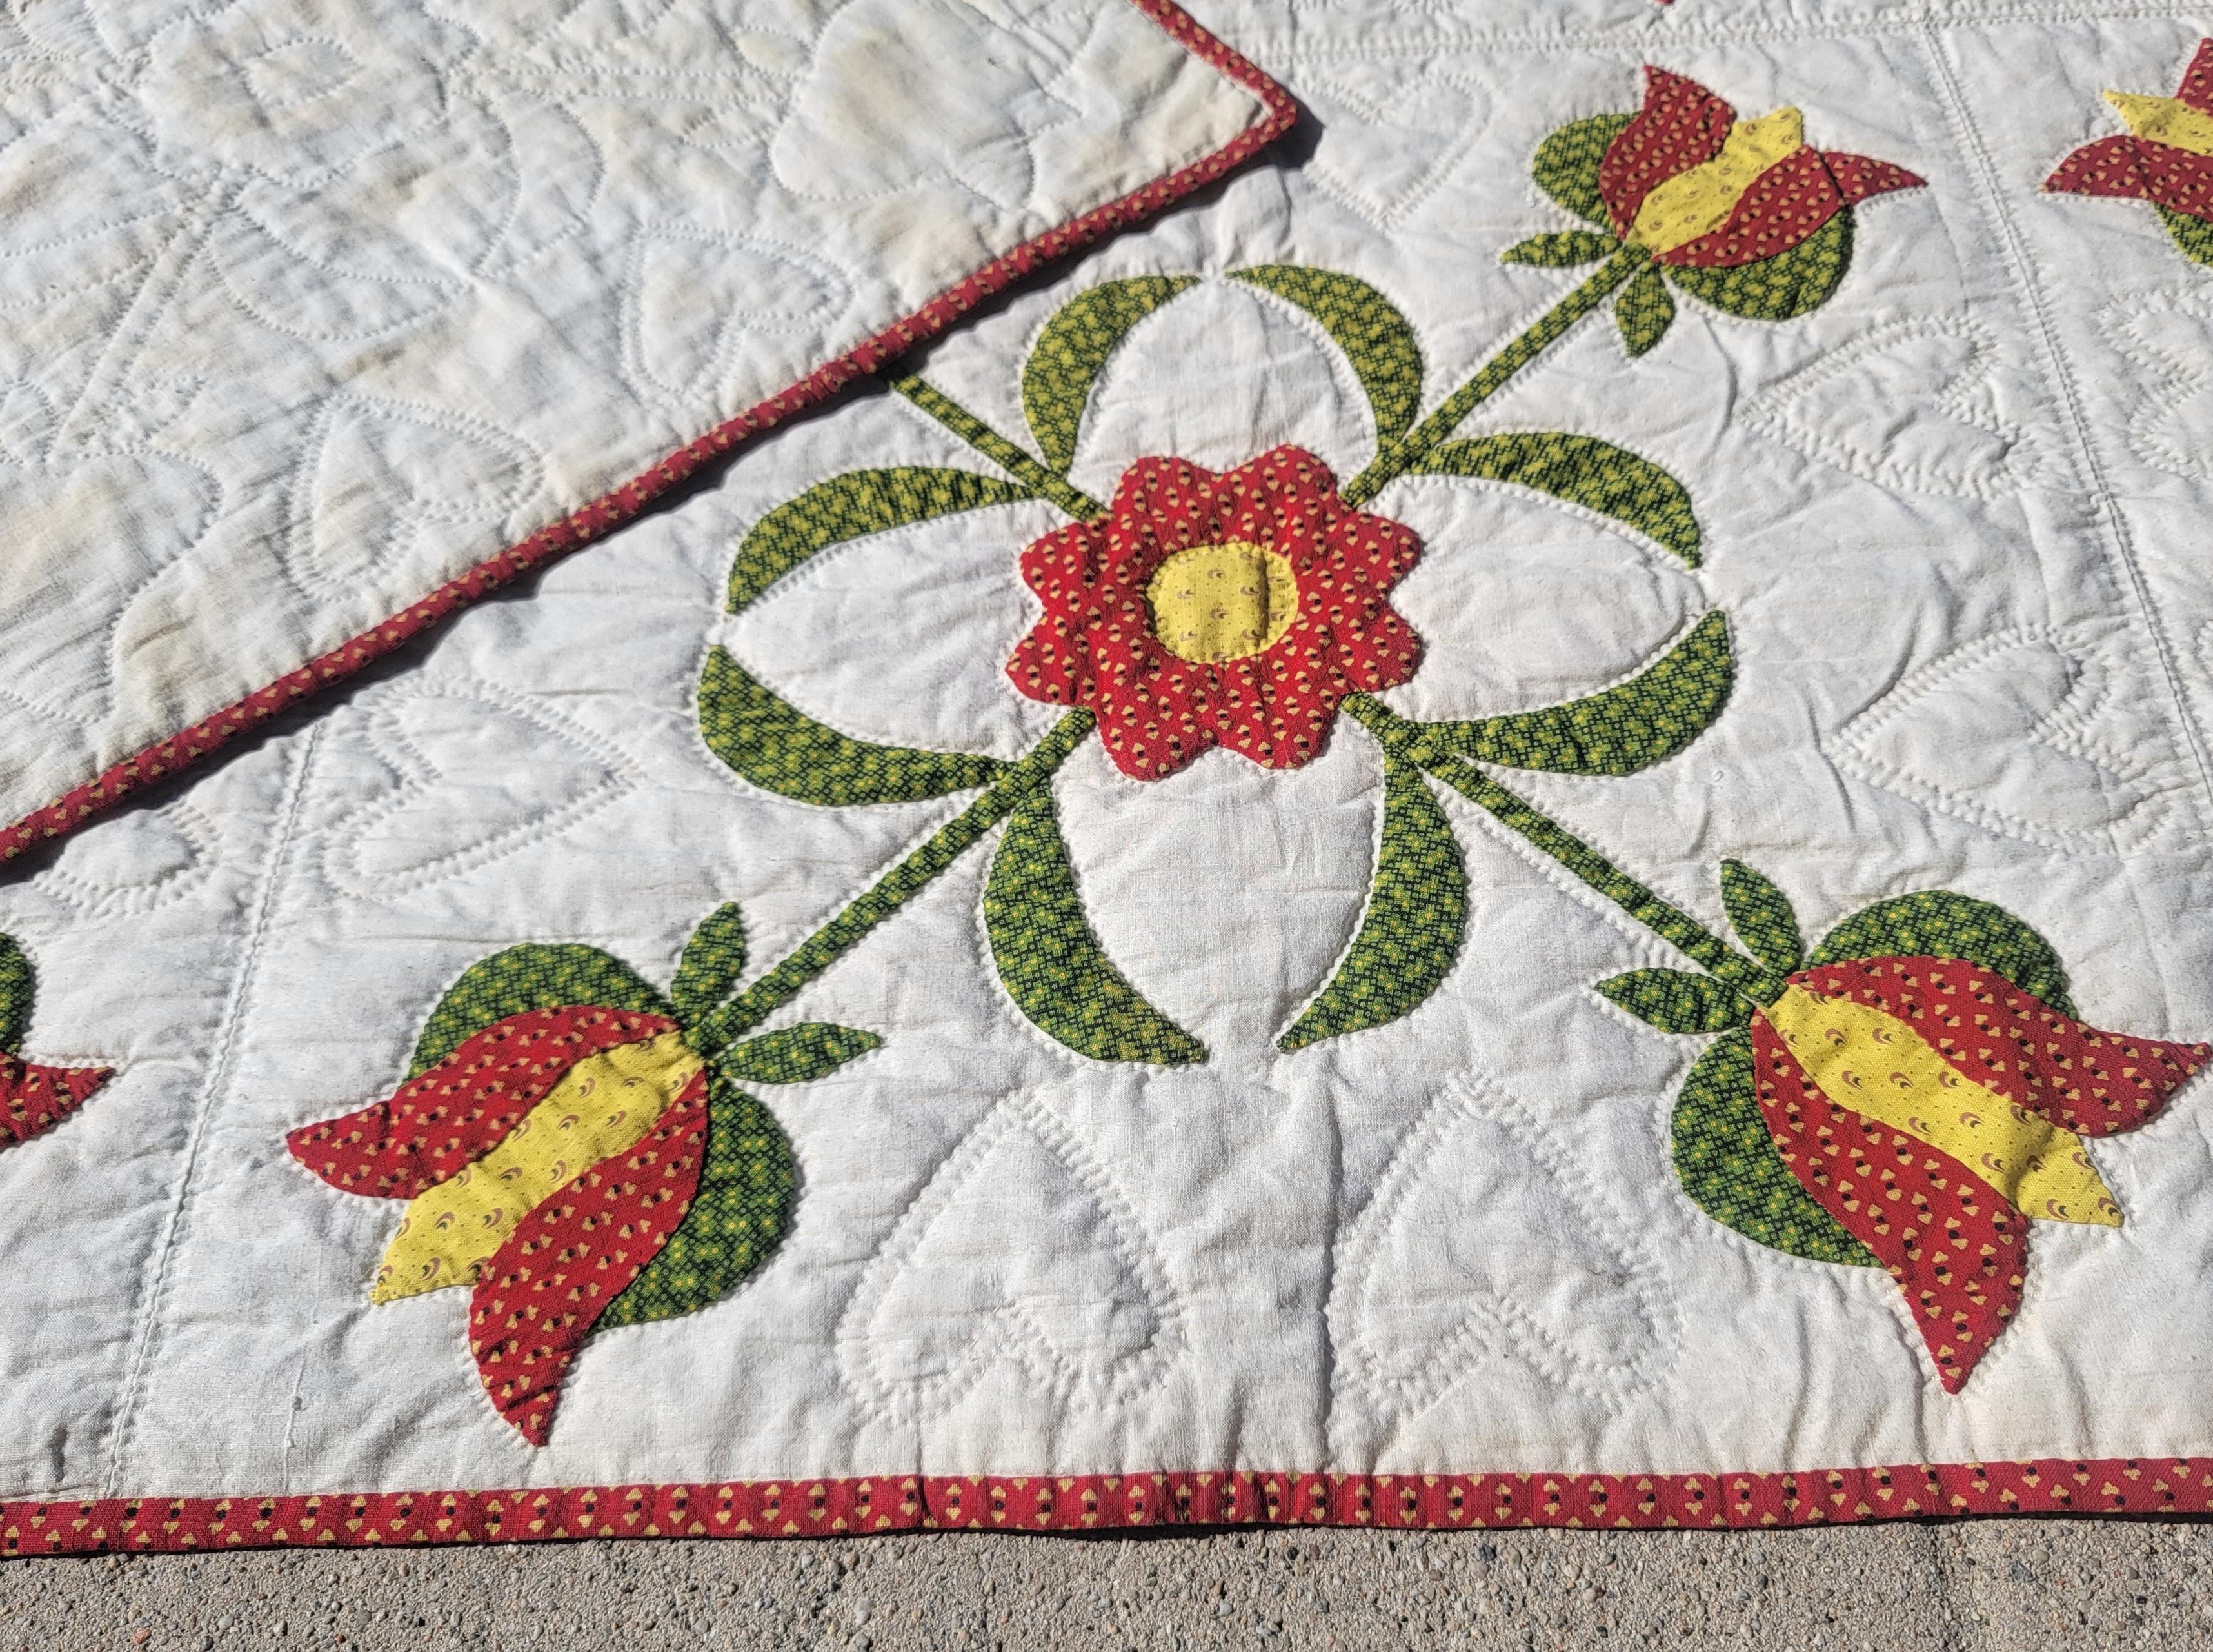 19Thc Pennsylvania applique quilt from Lancaster County,Pennsylvania in fine condition.This amazing applique quilt comes from a very special folk art & quilt collection. The double tulips applique is quite unique and found in Pennsylvania folk art &